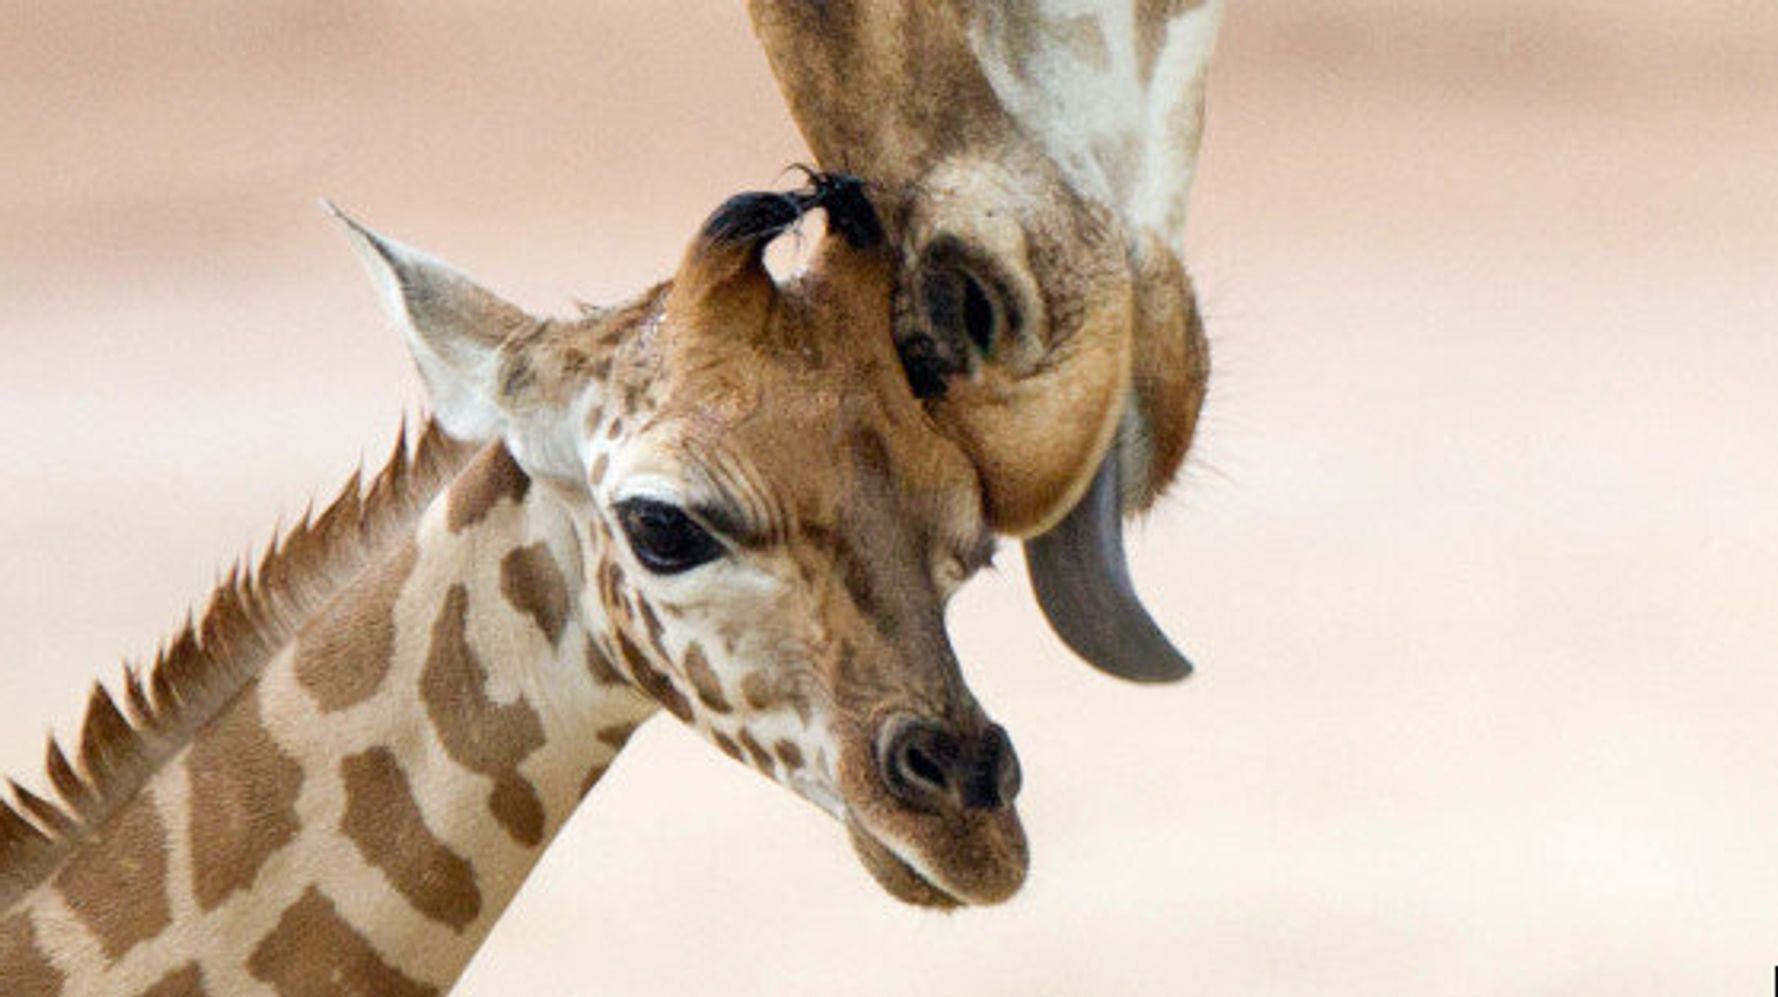 Baby Animals And Mothers: 50 Super Cute Babies And Their Moms (PHOTOS) |  HuffPost Life